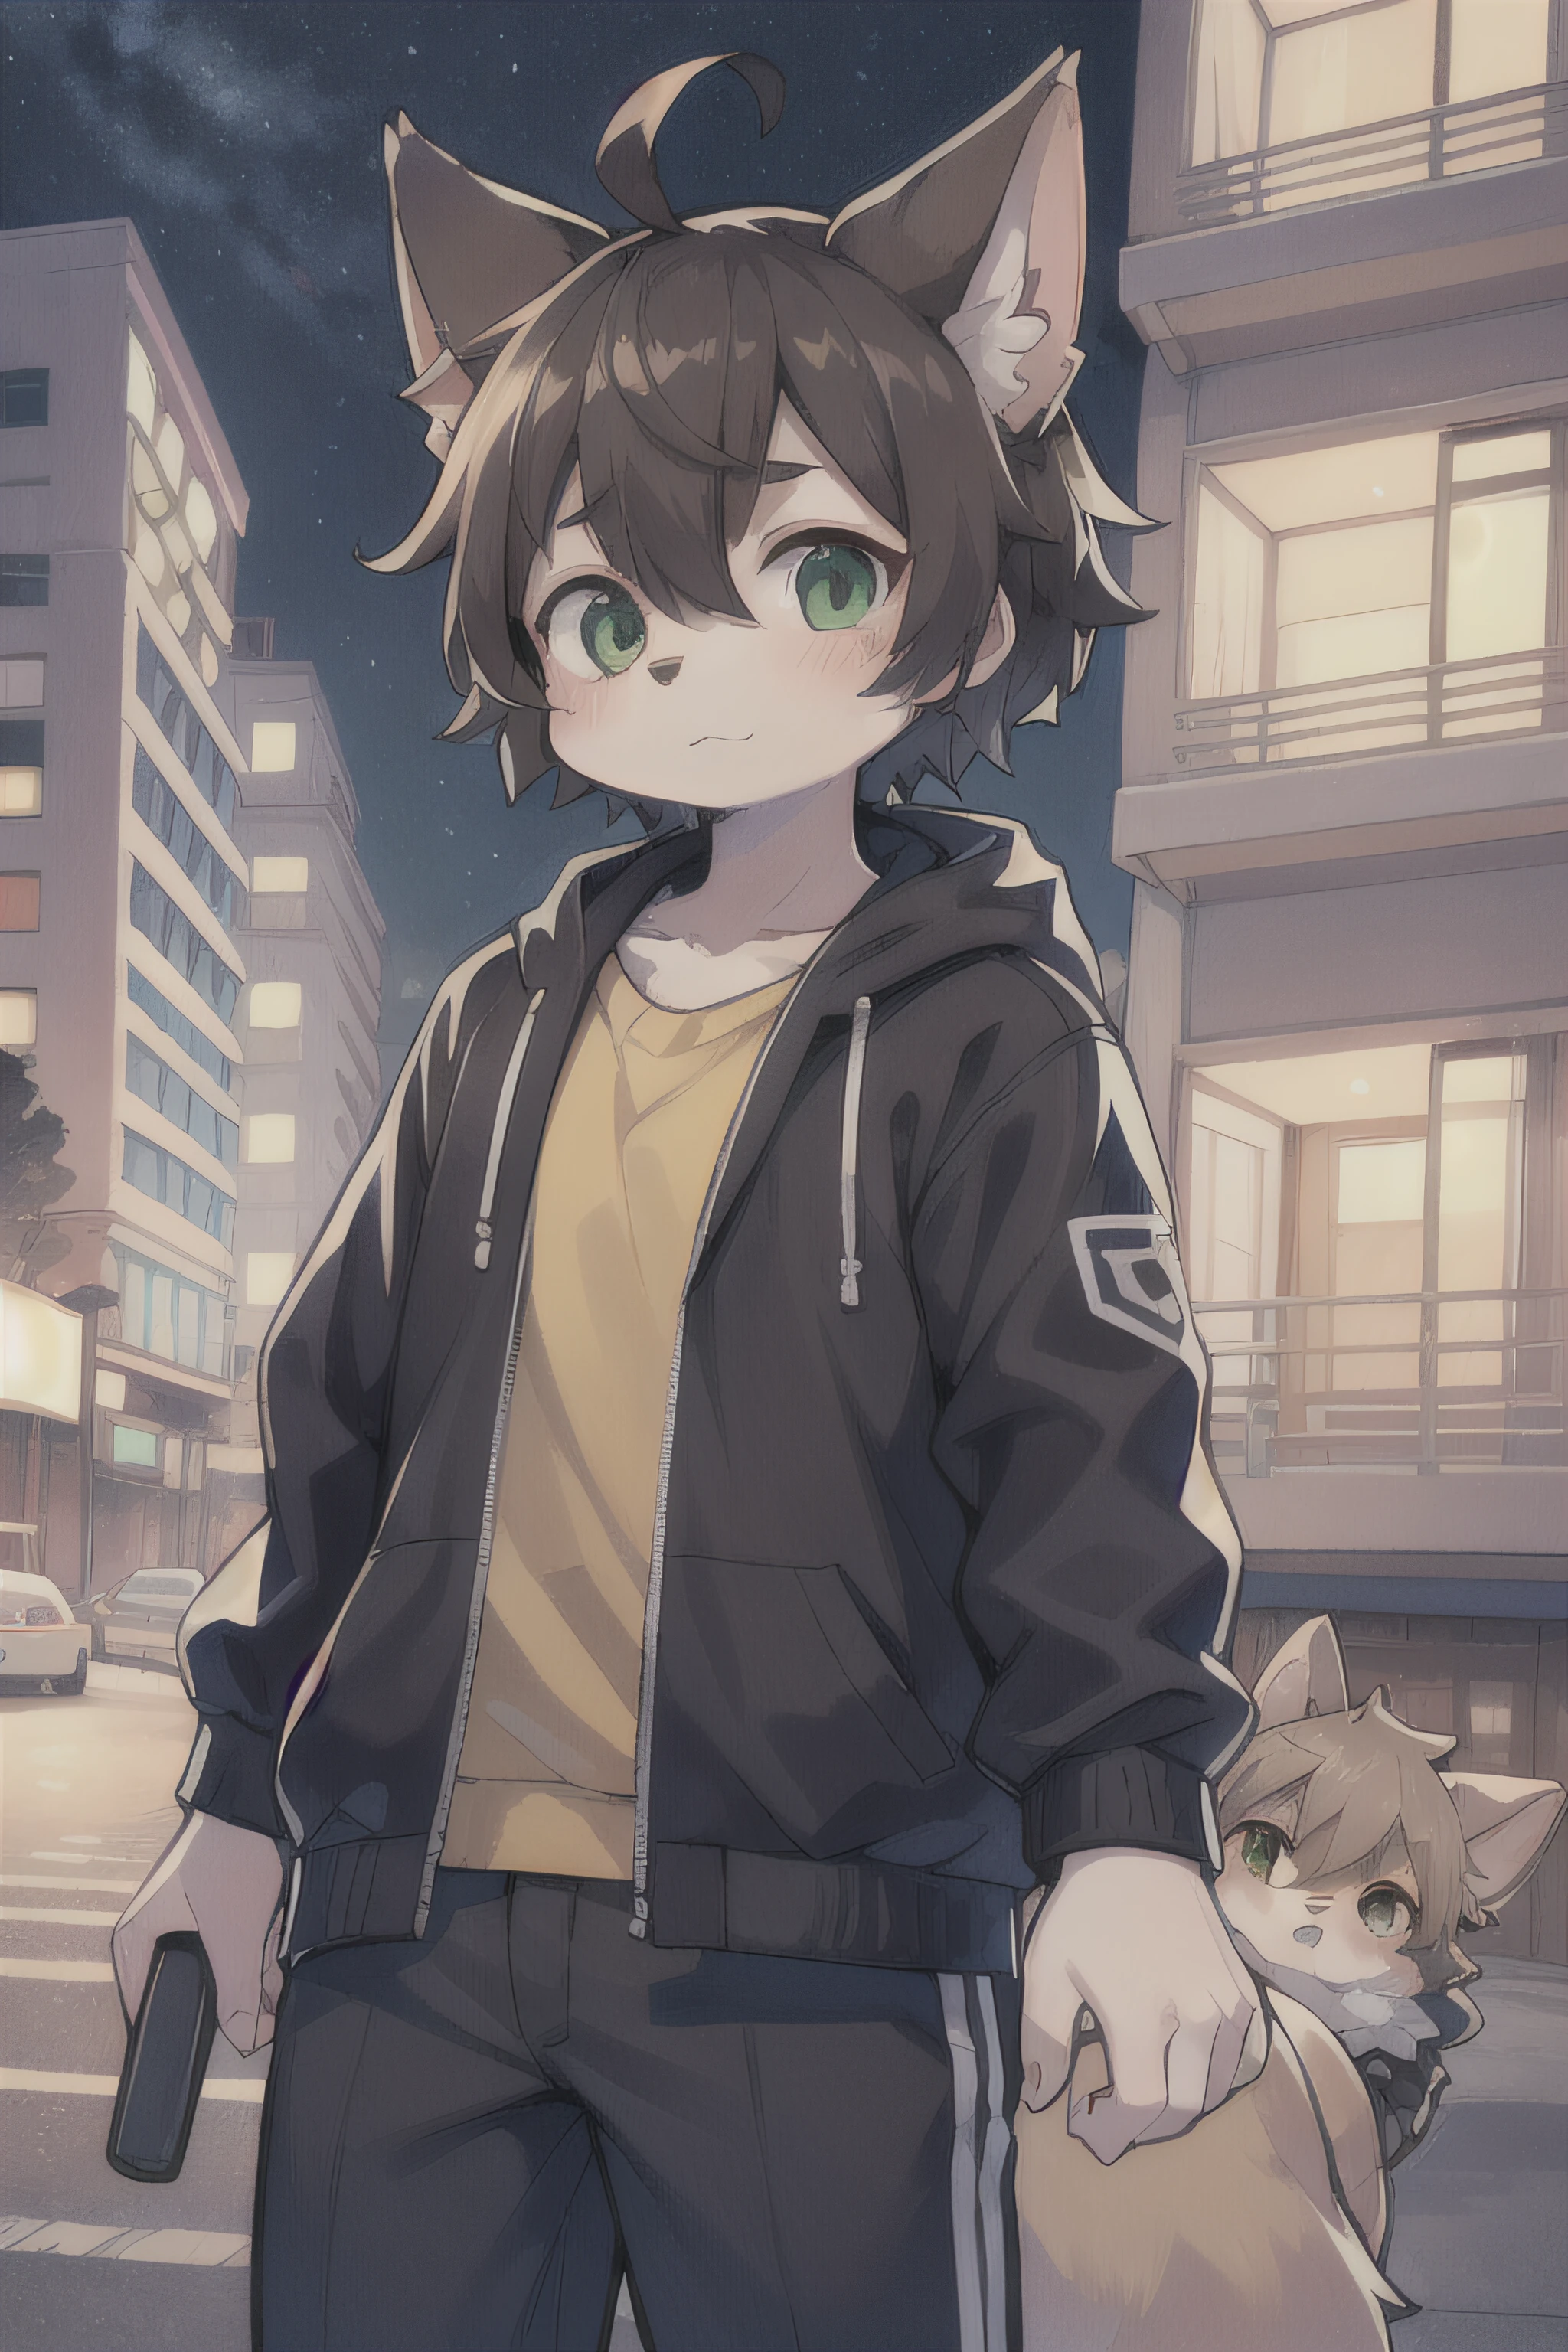 white cat boy, green left eye, blue right eye, anime, Furson, furry, kemono, delgado, tender, 10 years old, brown hair, man, sitting on the roof of a building at night looking up at the sky